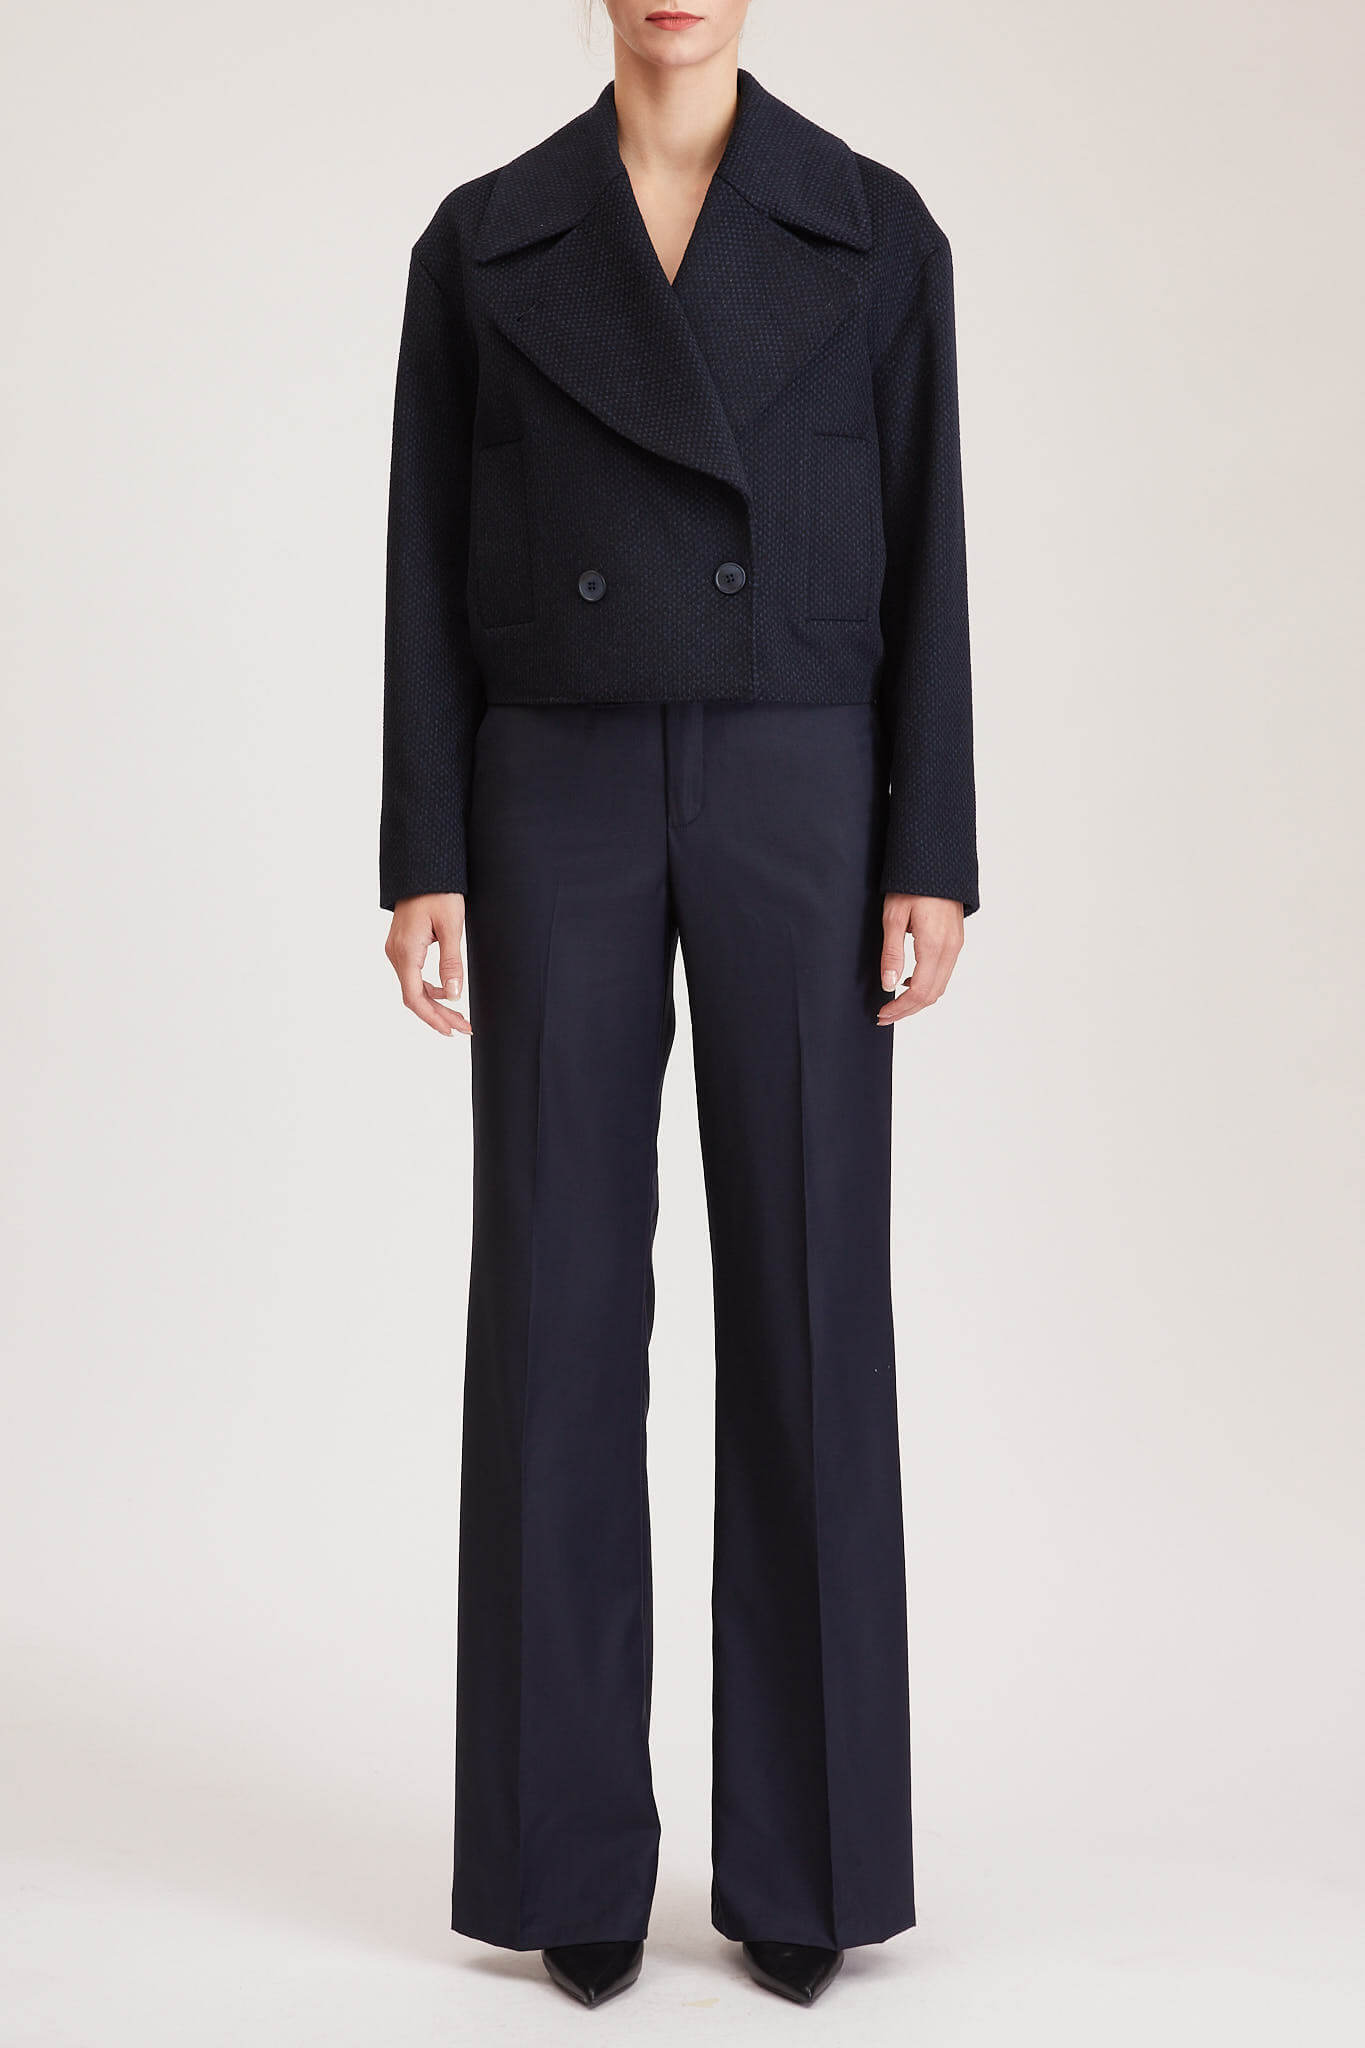 Ashford Coat – Double breasted short jacket in navy blue cashmere blend